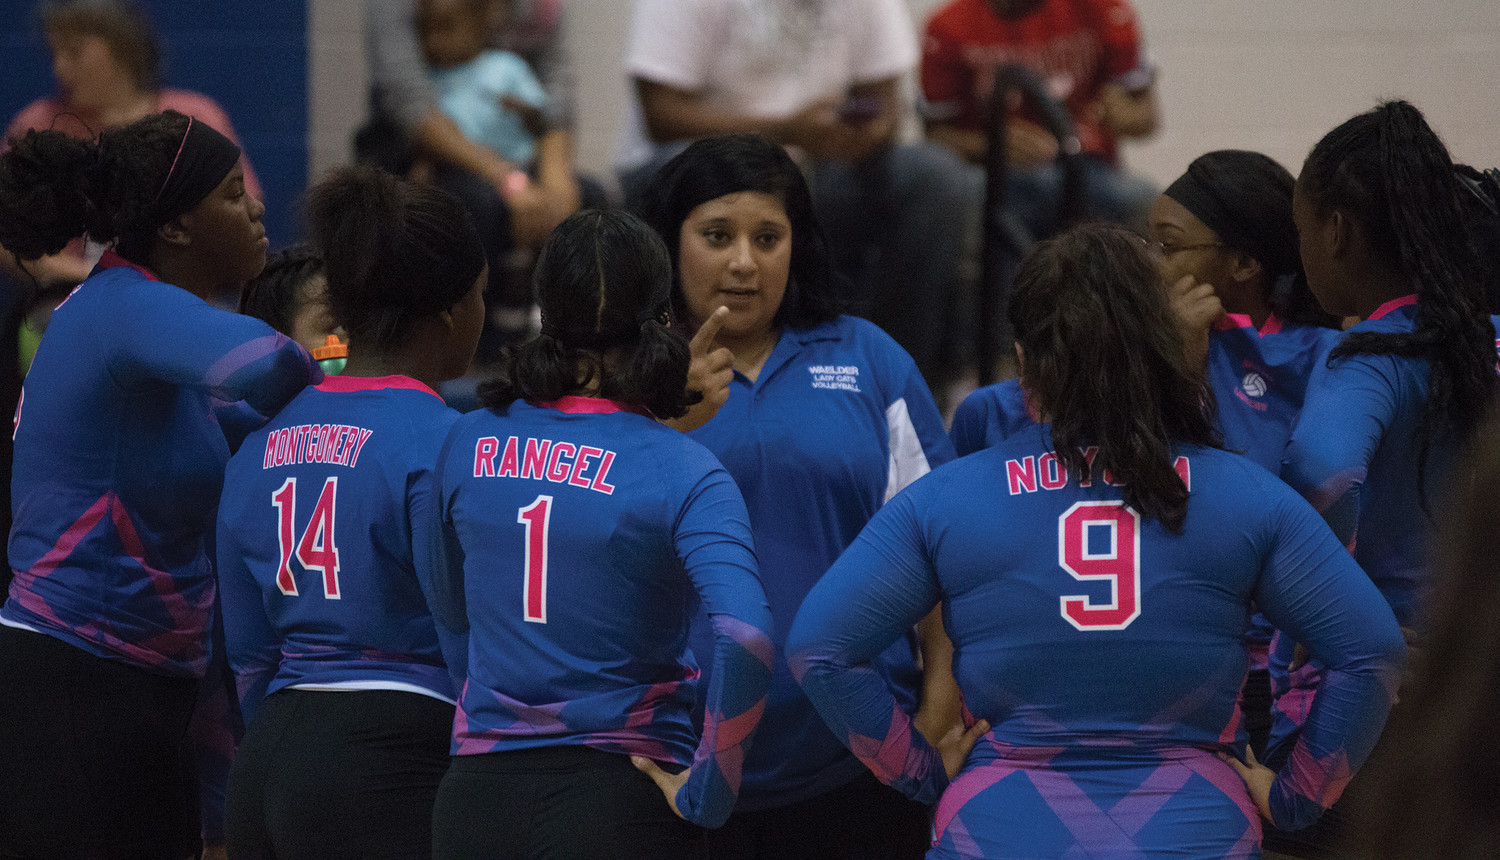 WAELDER:
Waelder head coach Martha Zuniga is back for her second year, giving the Lady Wildcats a sense of consistently that they have lacked in the program for many years. With the added stability, the Lady Wildcats have been able to progress, taking the top seed out of Class 1A volleyball, while also showing signs of improvement in basketball.